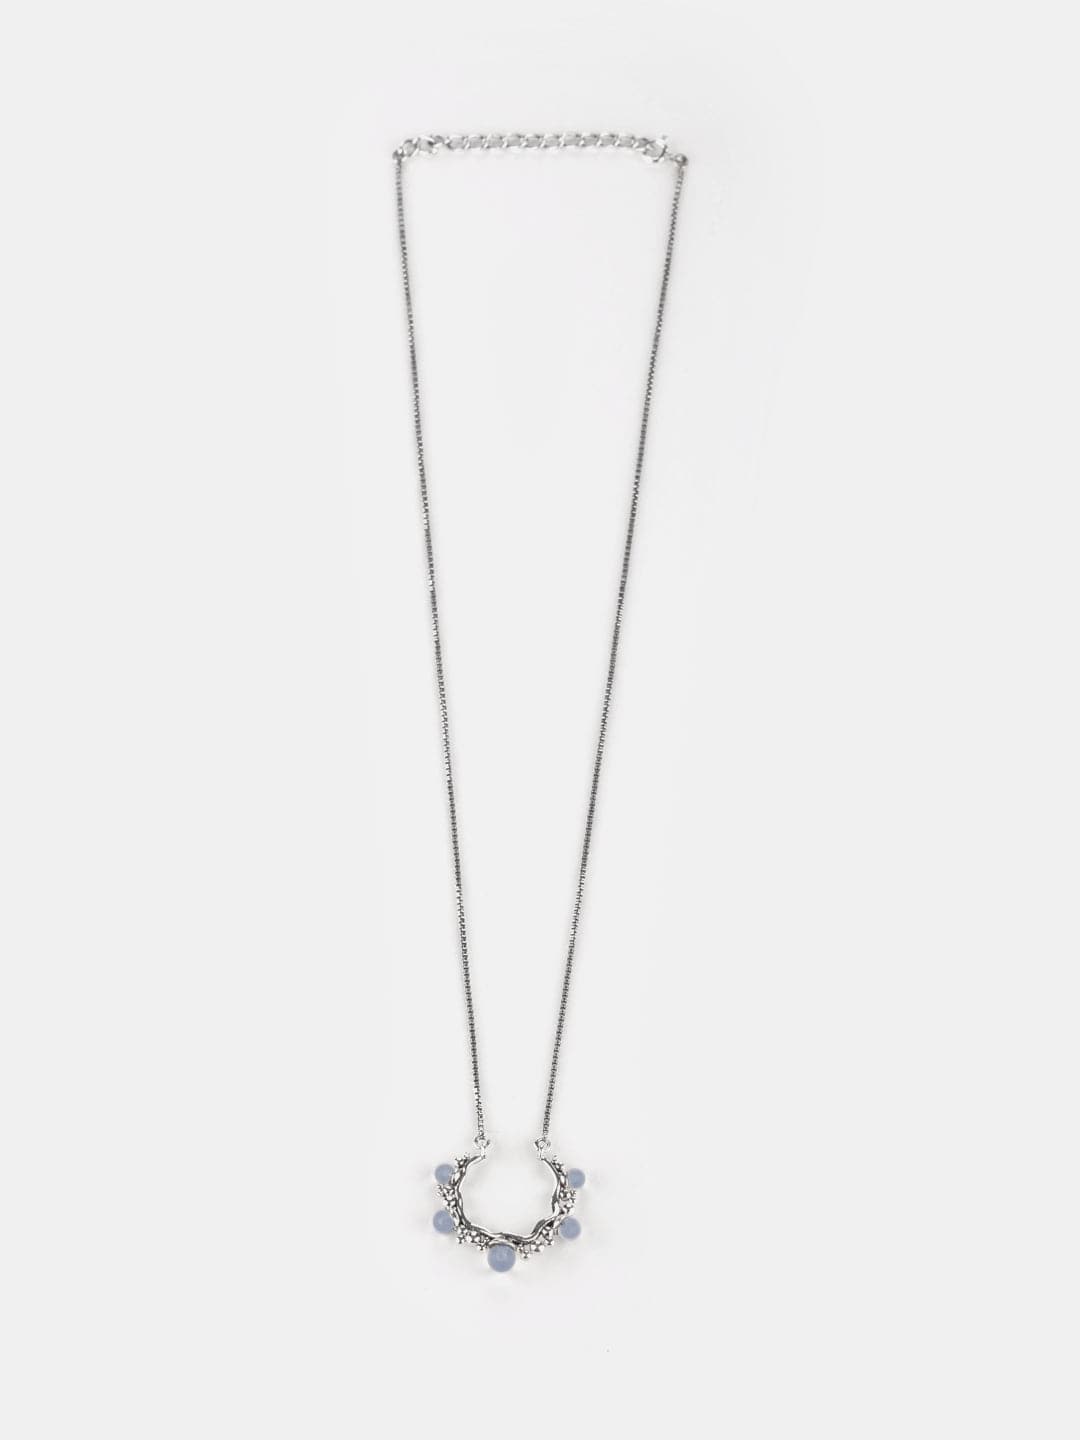 A Sunday Siesta Necklace in 925 Silver